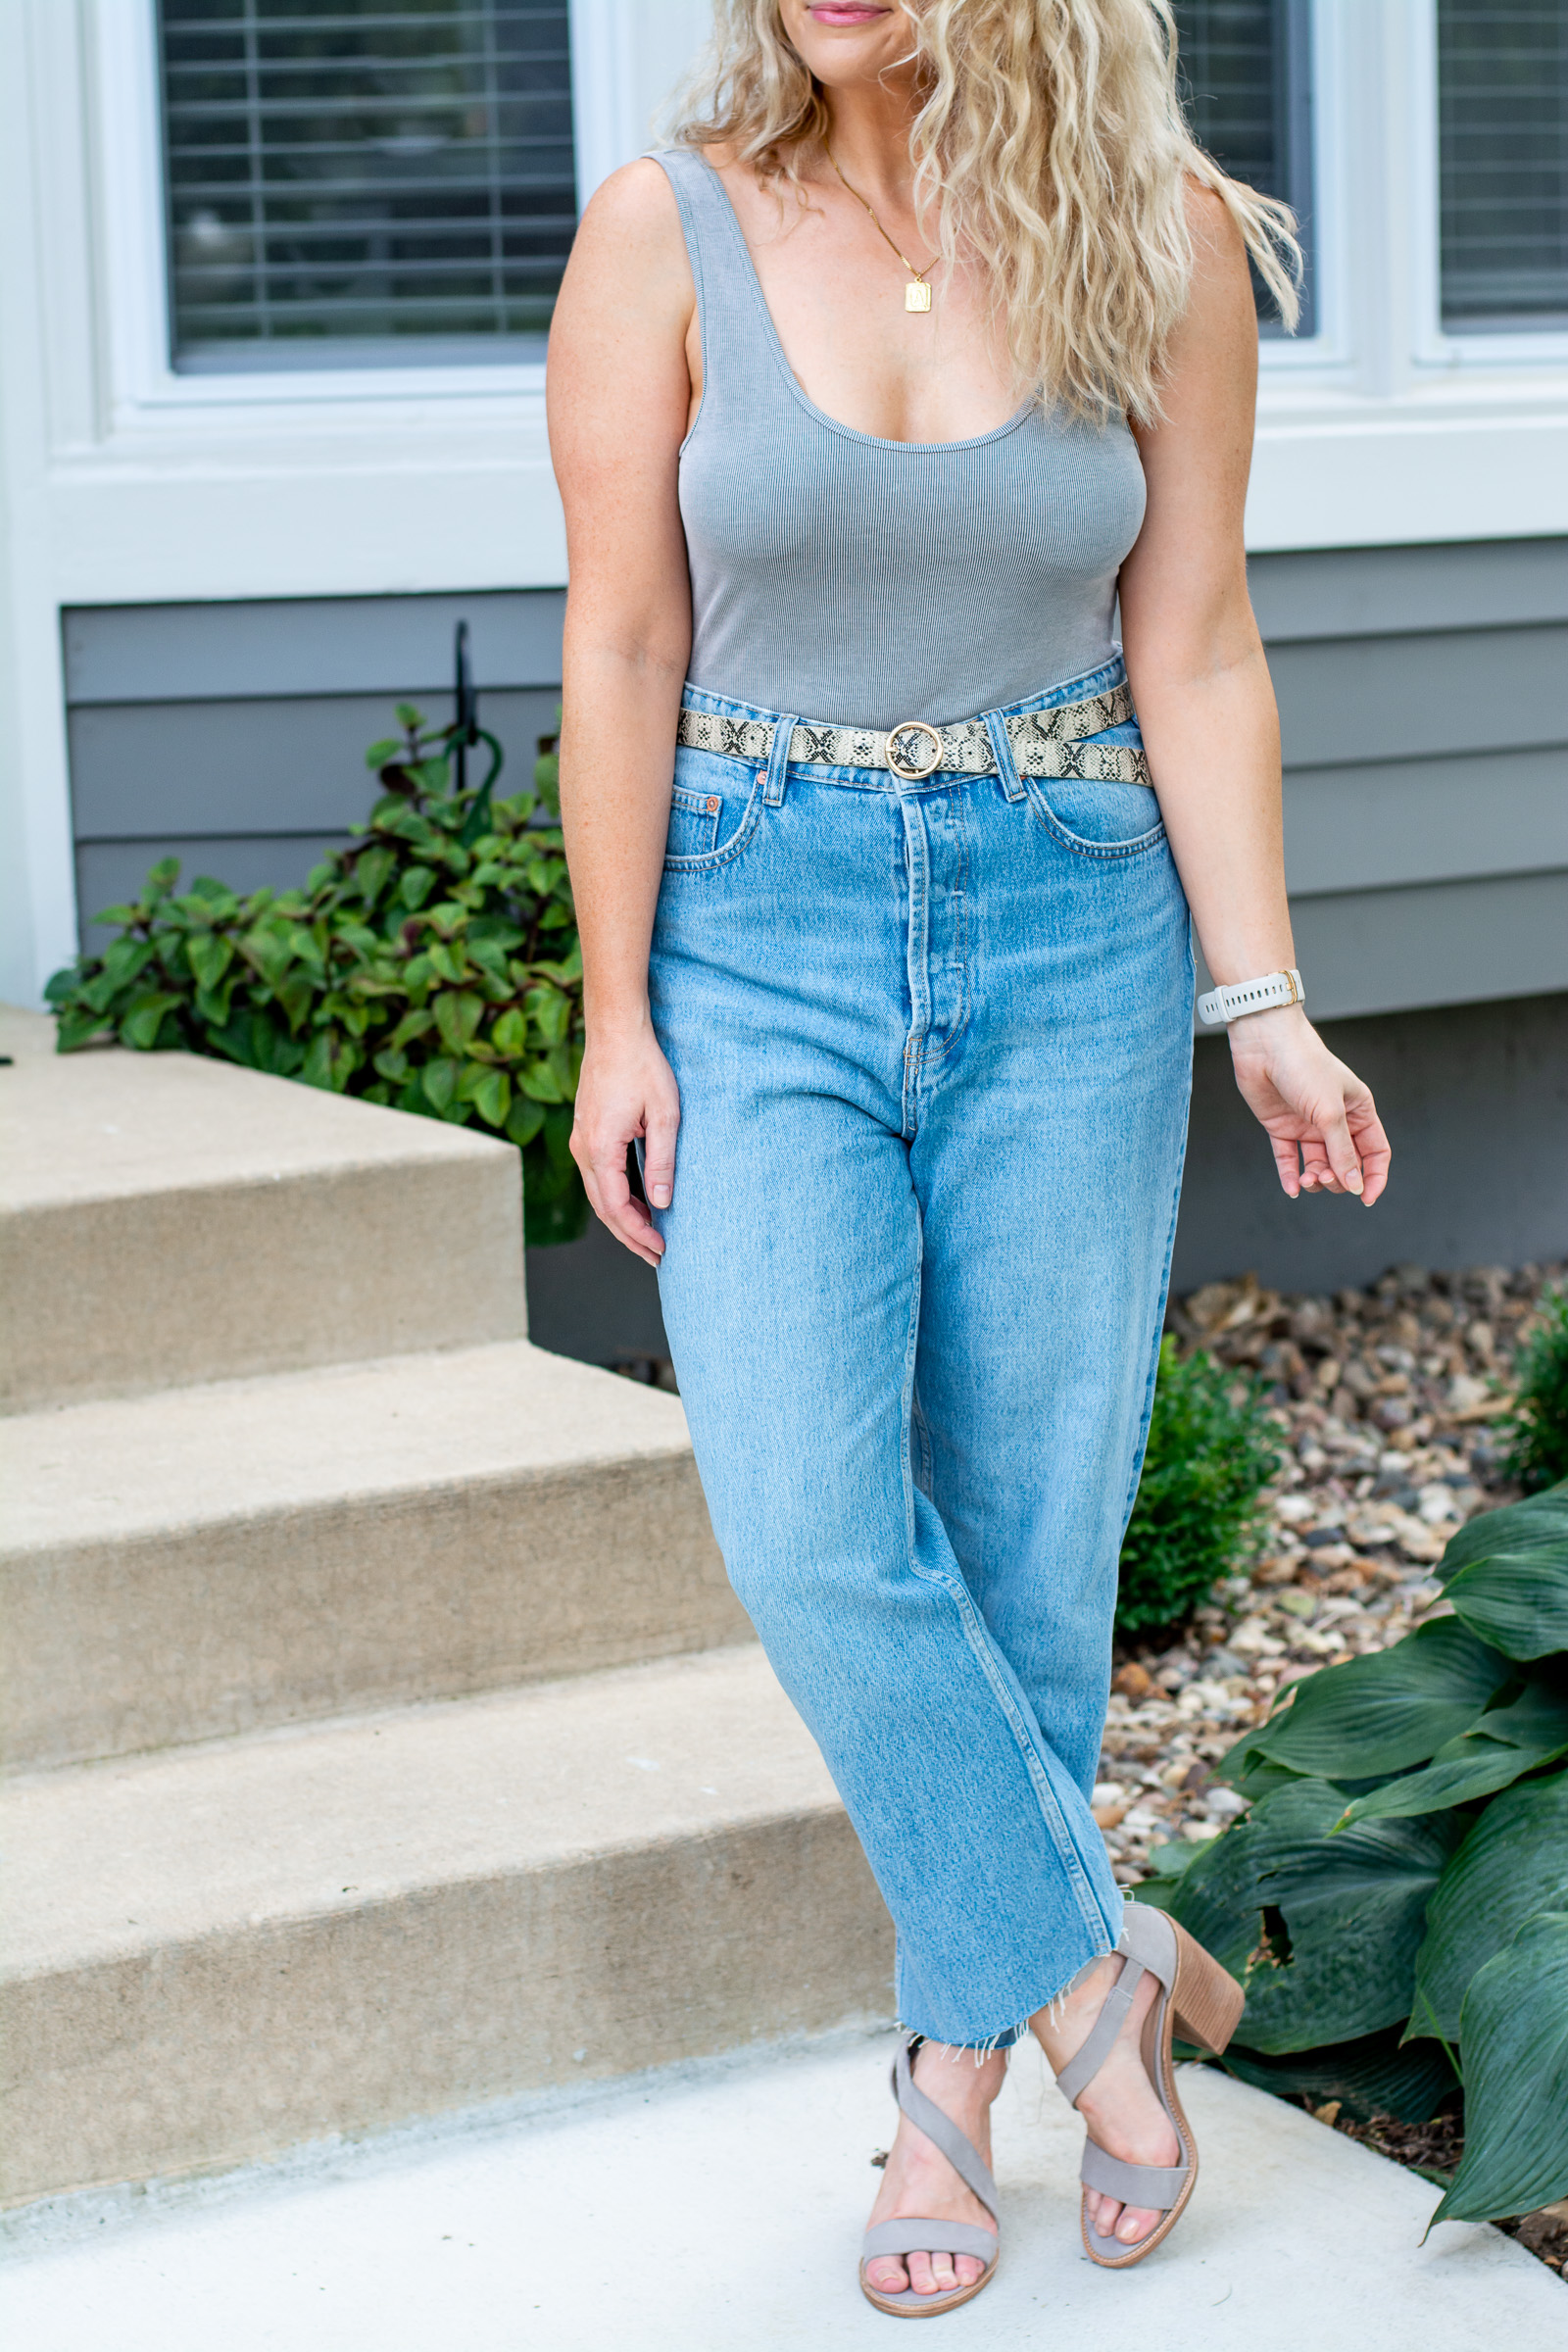 How To Wear Mom Jeans For Curves - Sydne Style